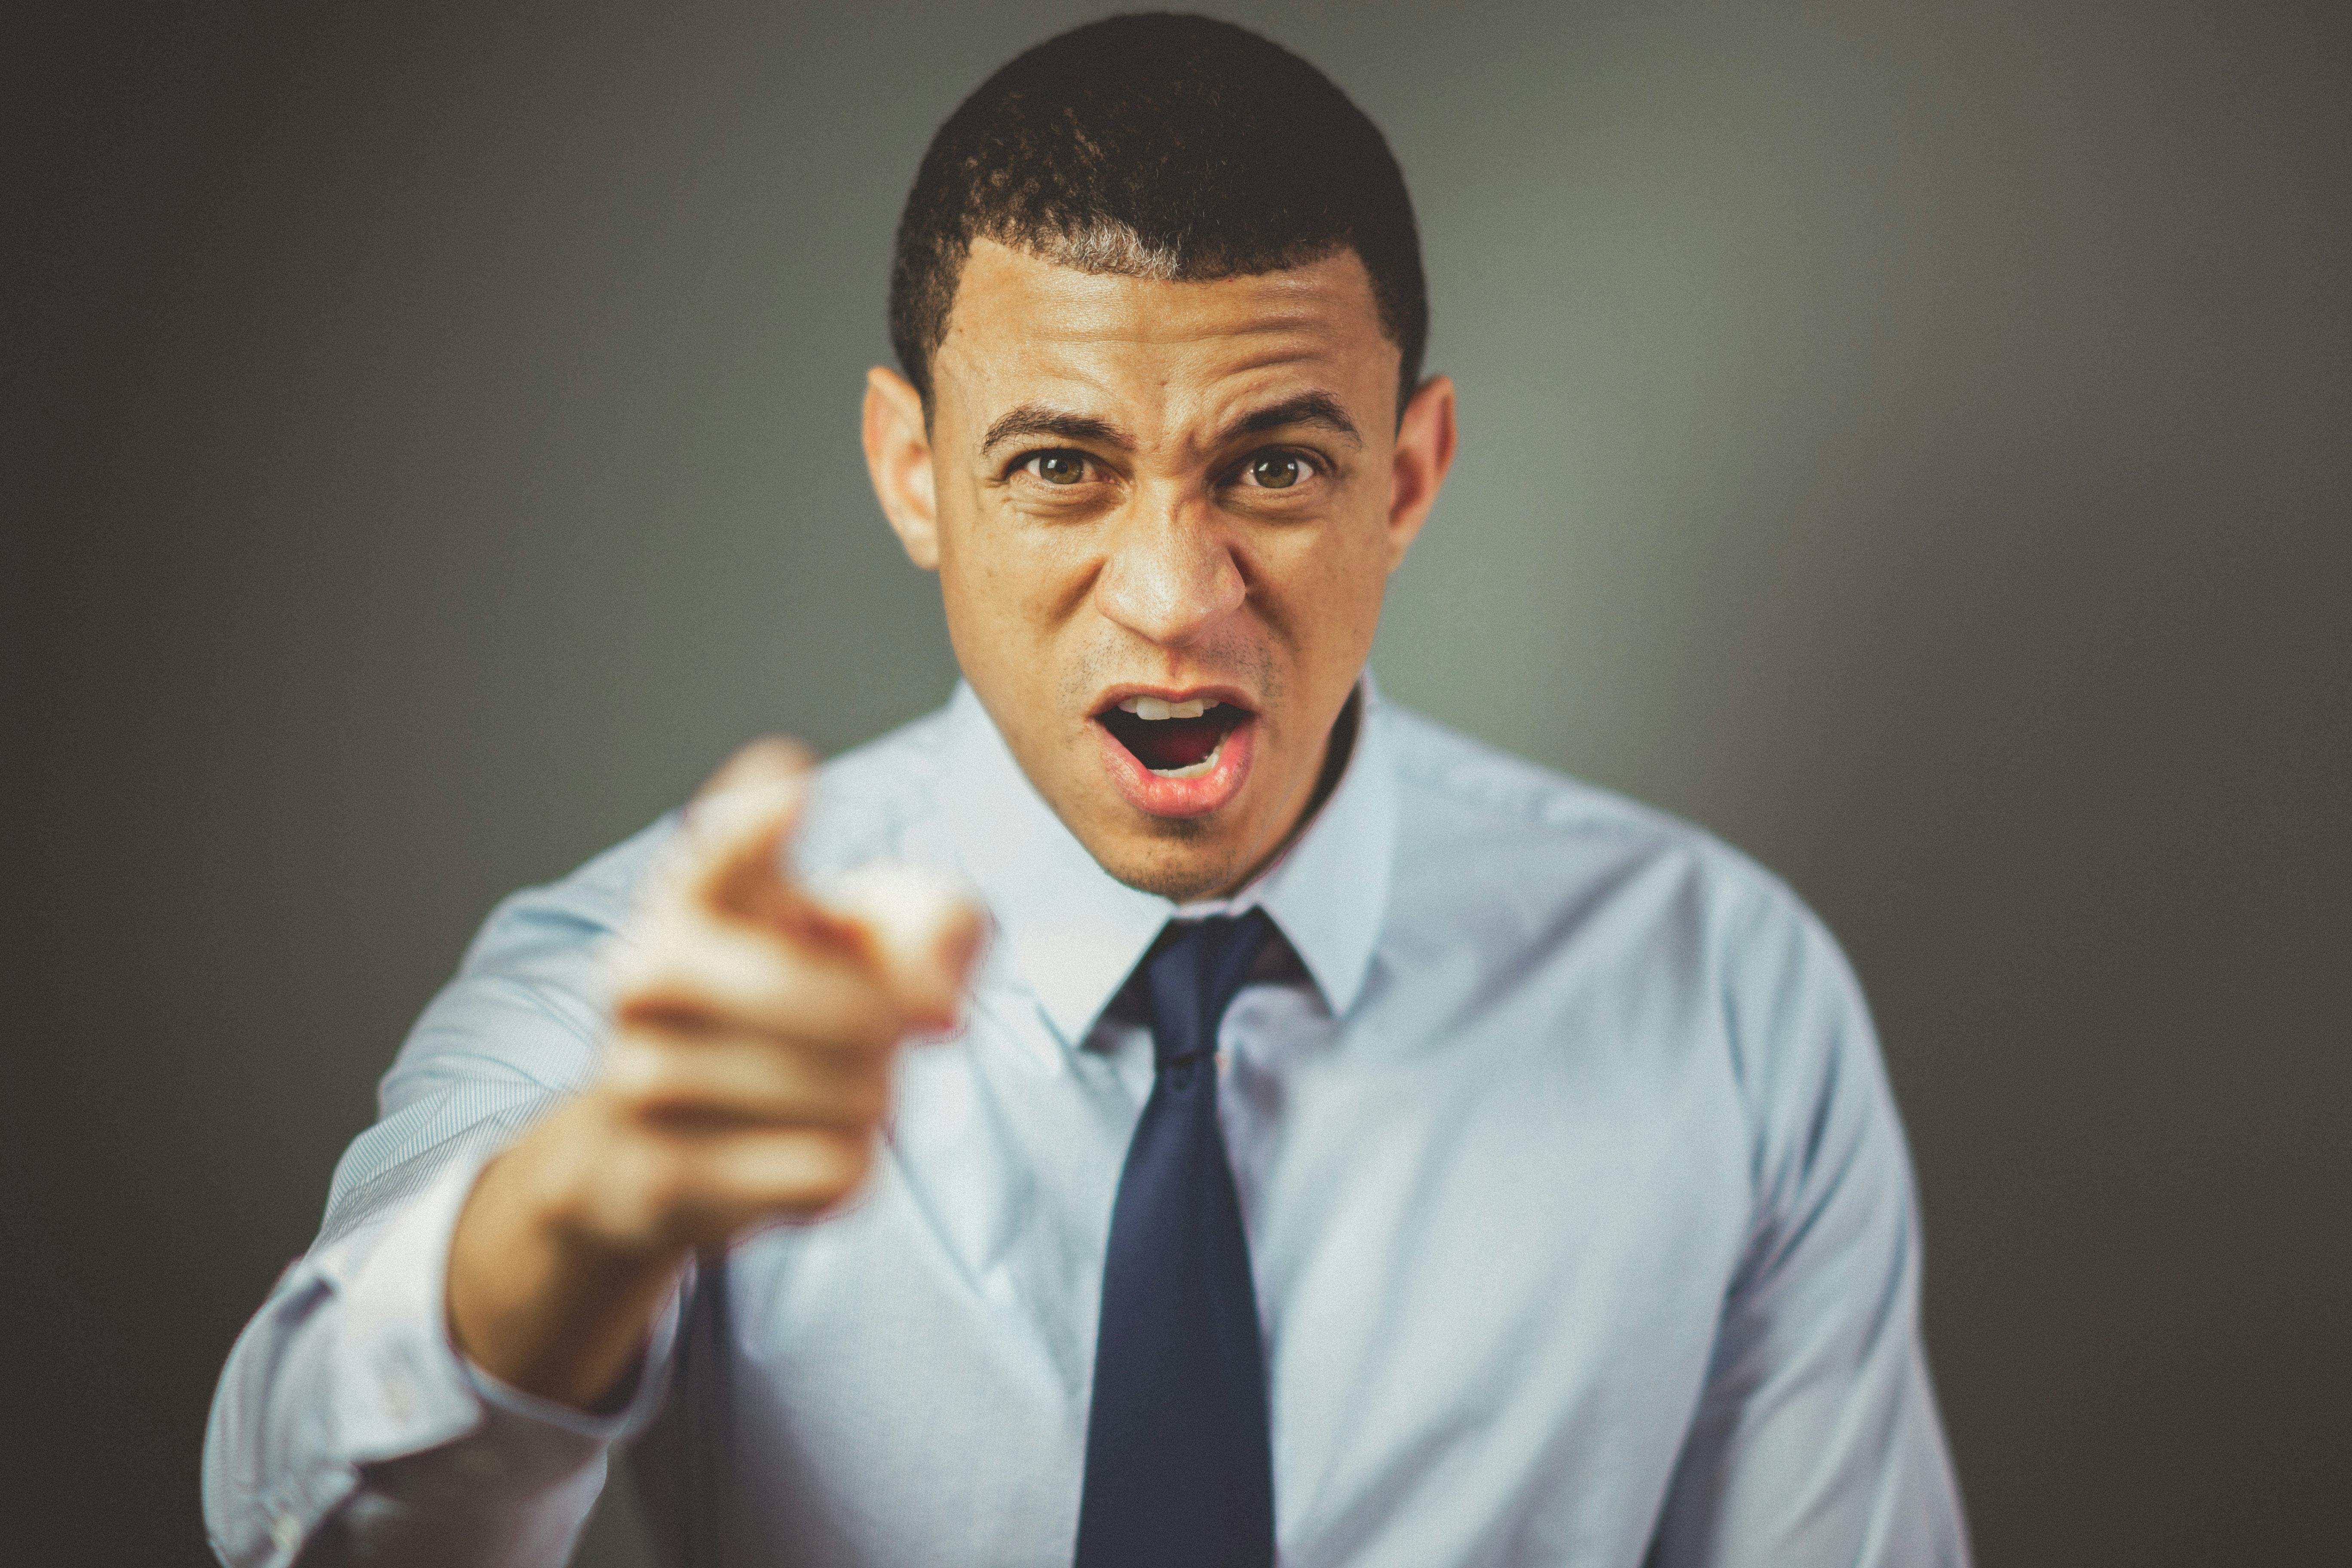 An angry man yelling and pointing | Source: Pexels